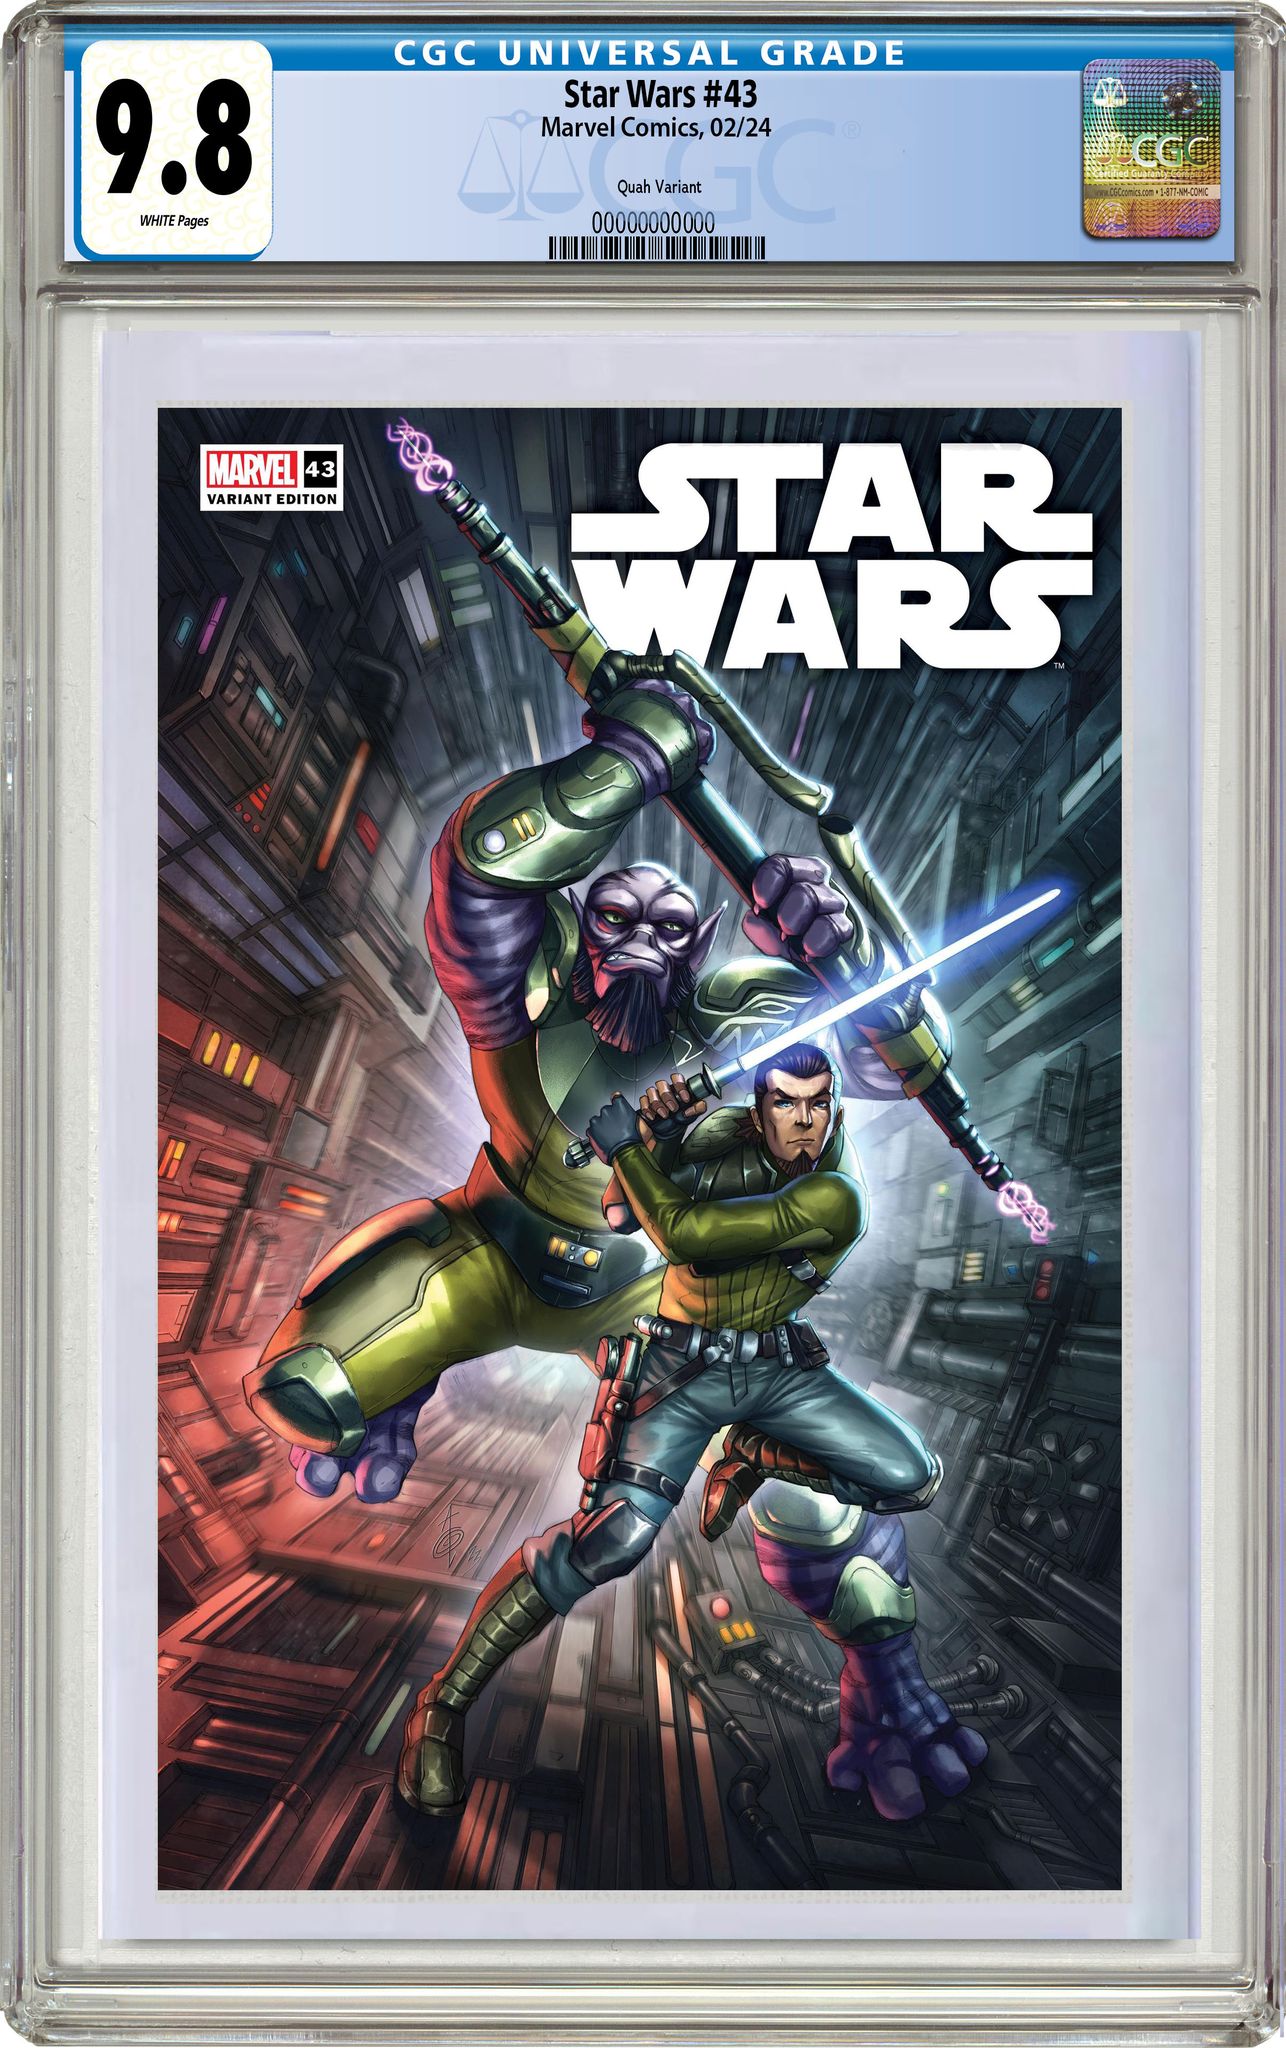 STAR WARS 43 ALAN QUAH REBELS 10TH ANNIVERSARY LIMITED EDITION #2 OF 4 EXCLUSIVE SERIES OPTIONS 02/21/24 (M31)